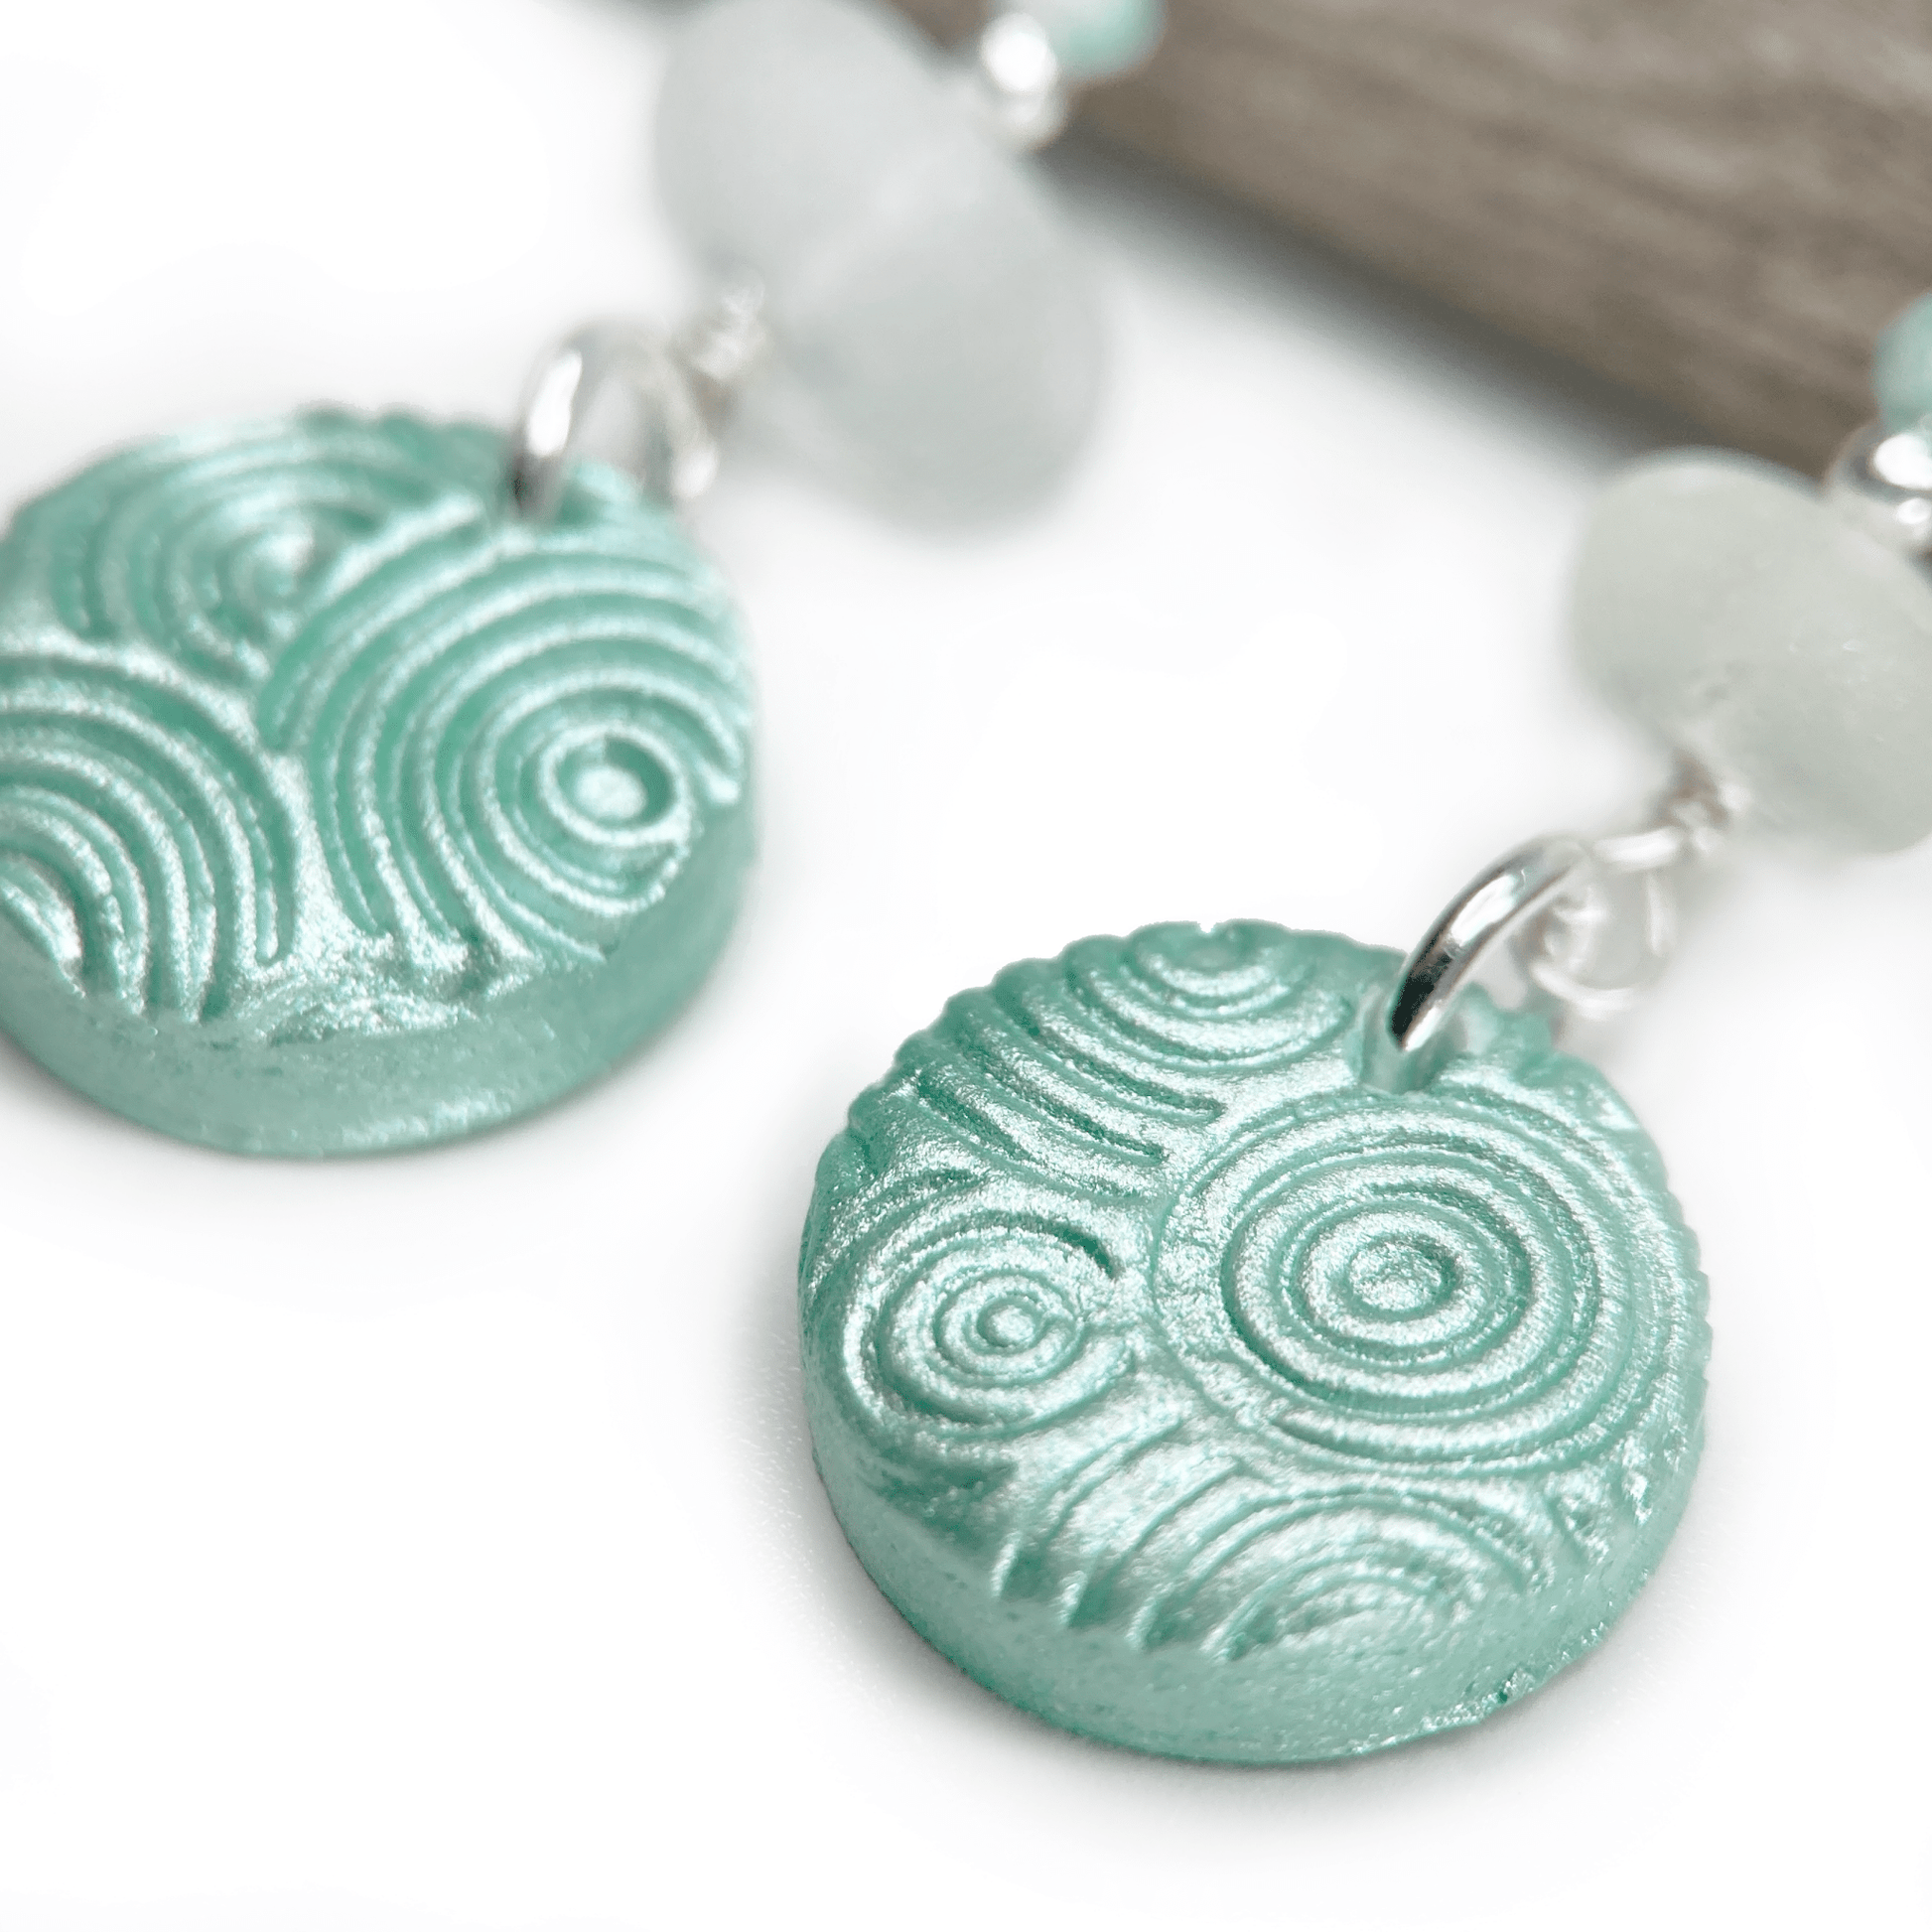 Wave Ripple Dangly Earrings - Green Sea Glass and Amazonite Sterling Silver Earrings - East Neuk Beach Crafts